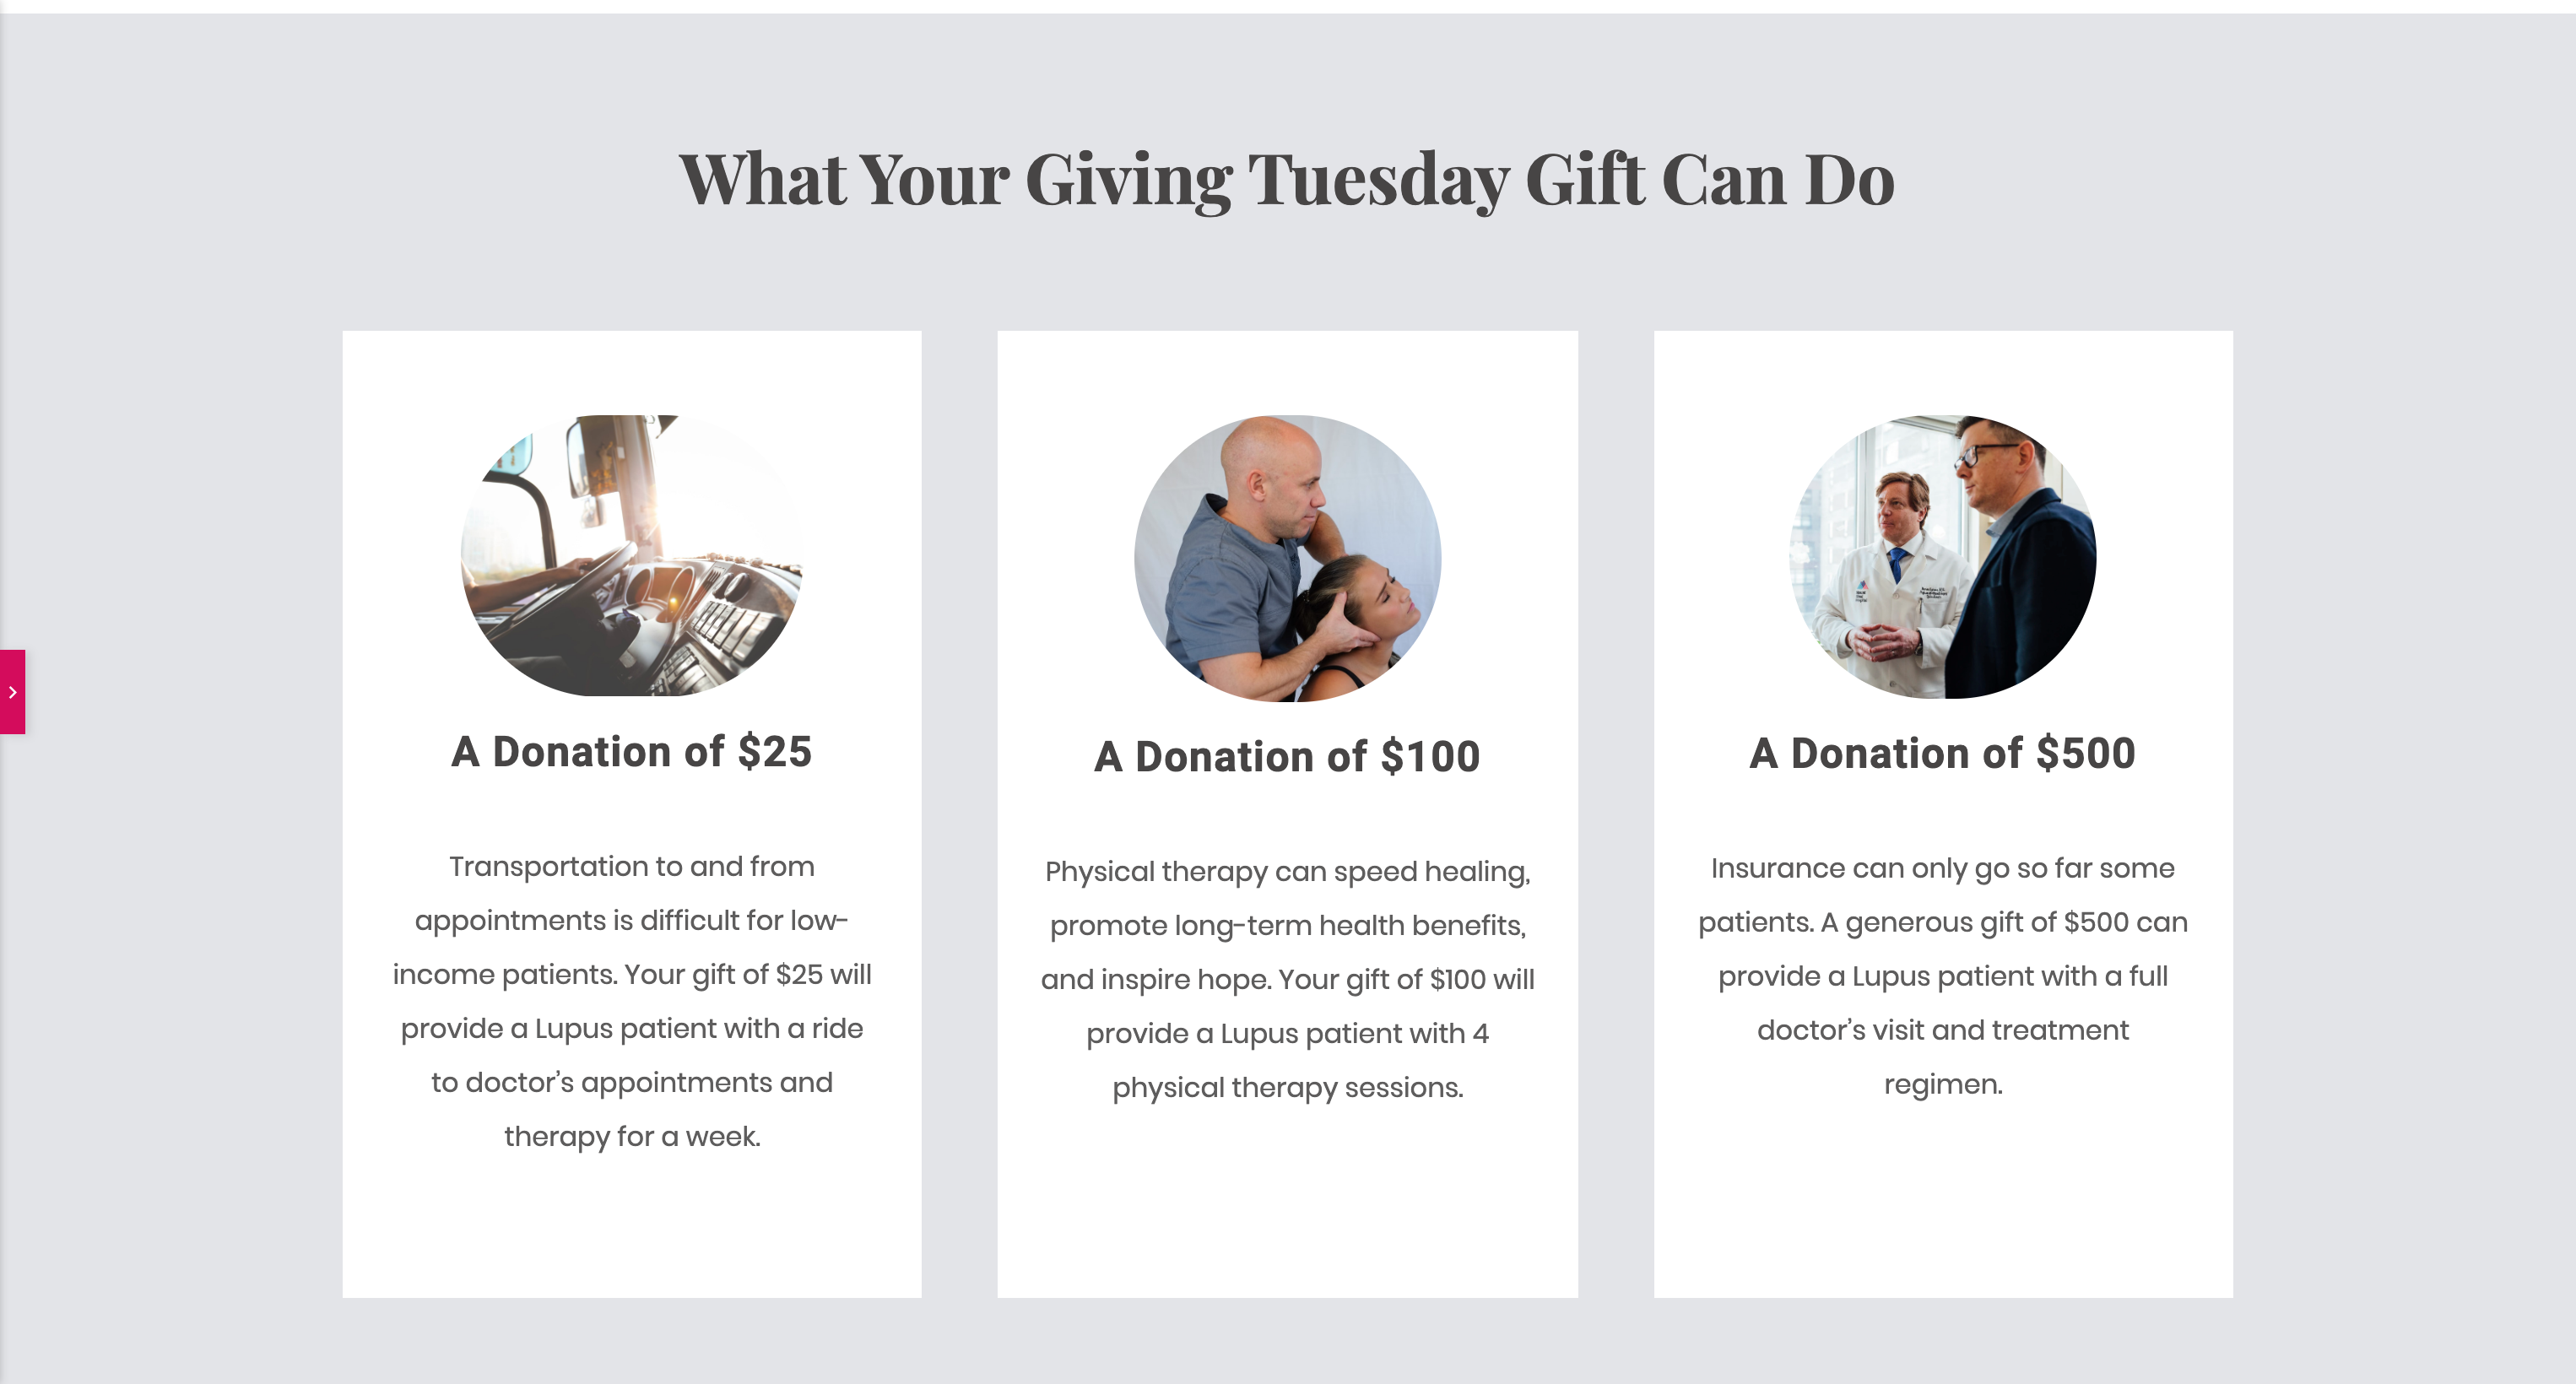 The title ‘What Your Giving Tuesday Gift Can Do’ followed by three images with donation levels between $25-$500 gives donors an idea of what their donation will cover.